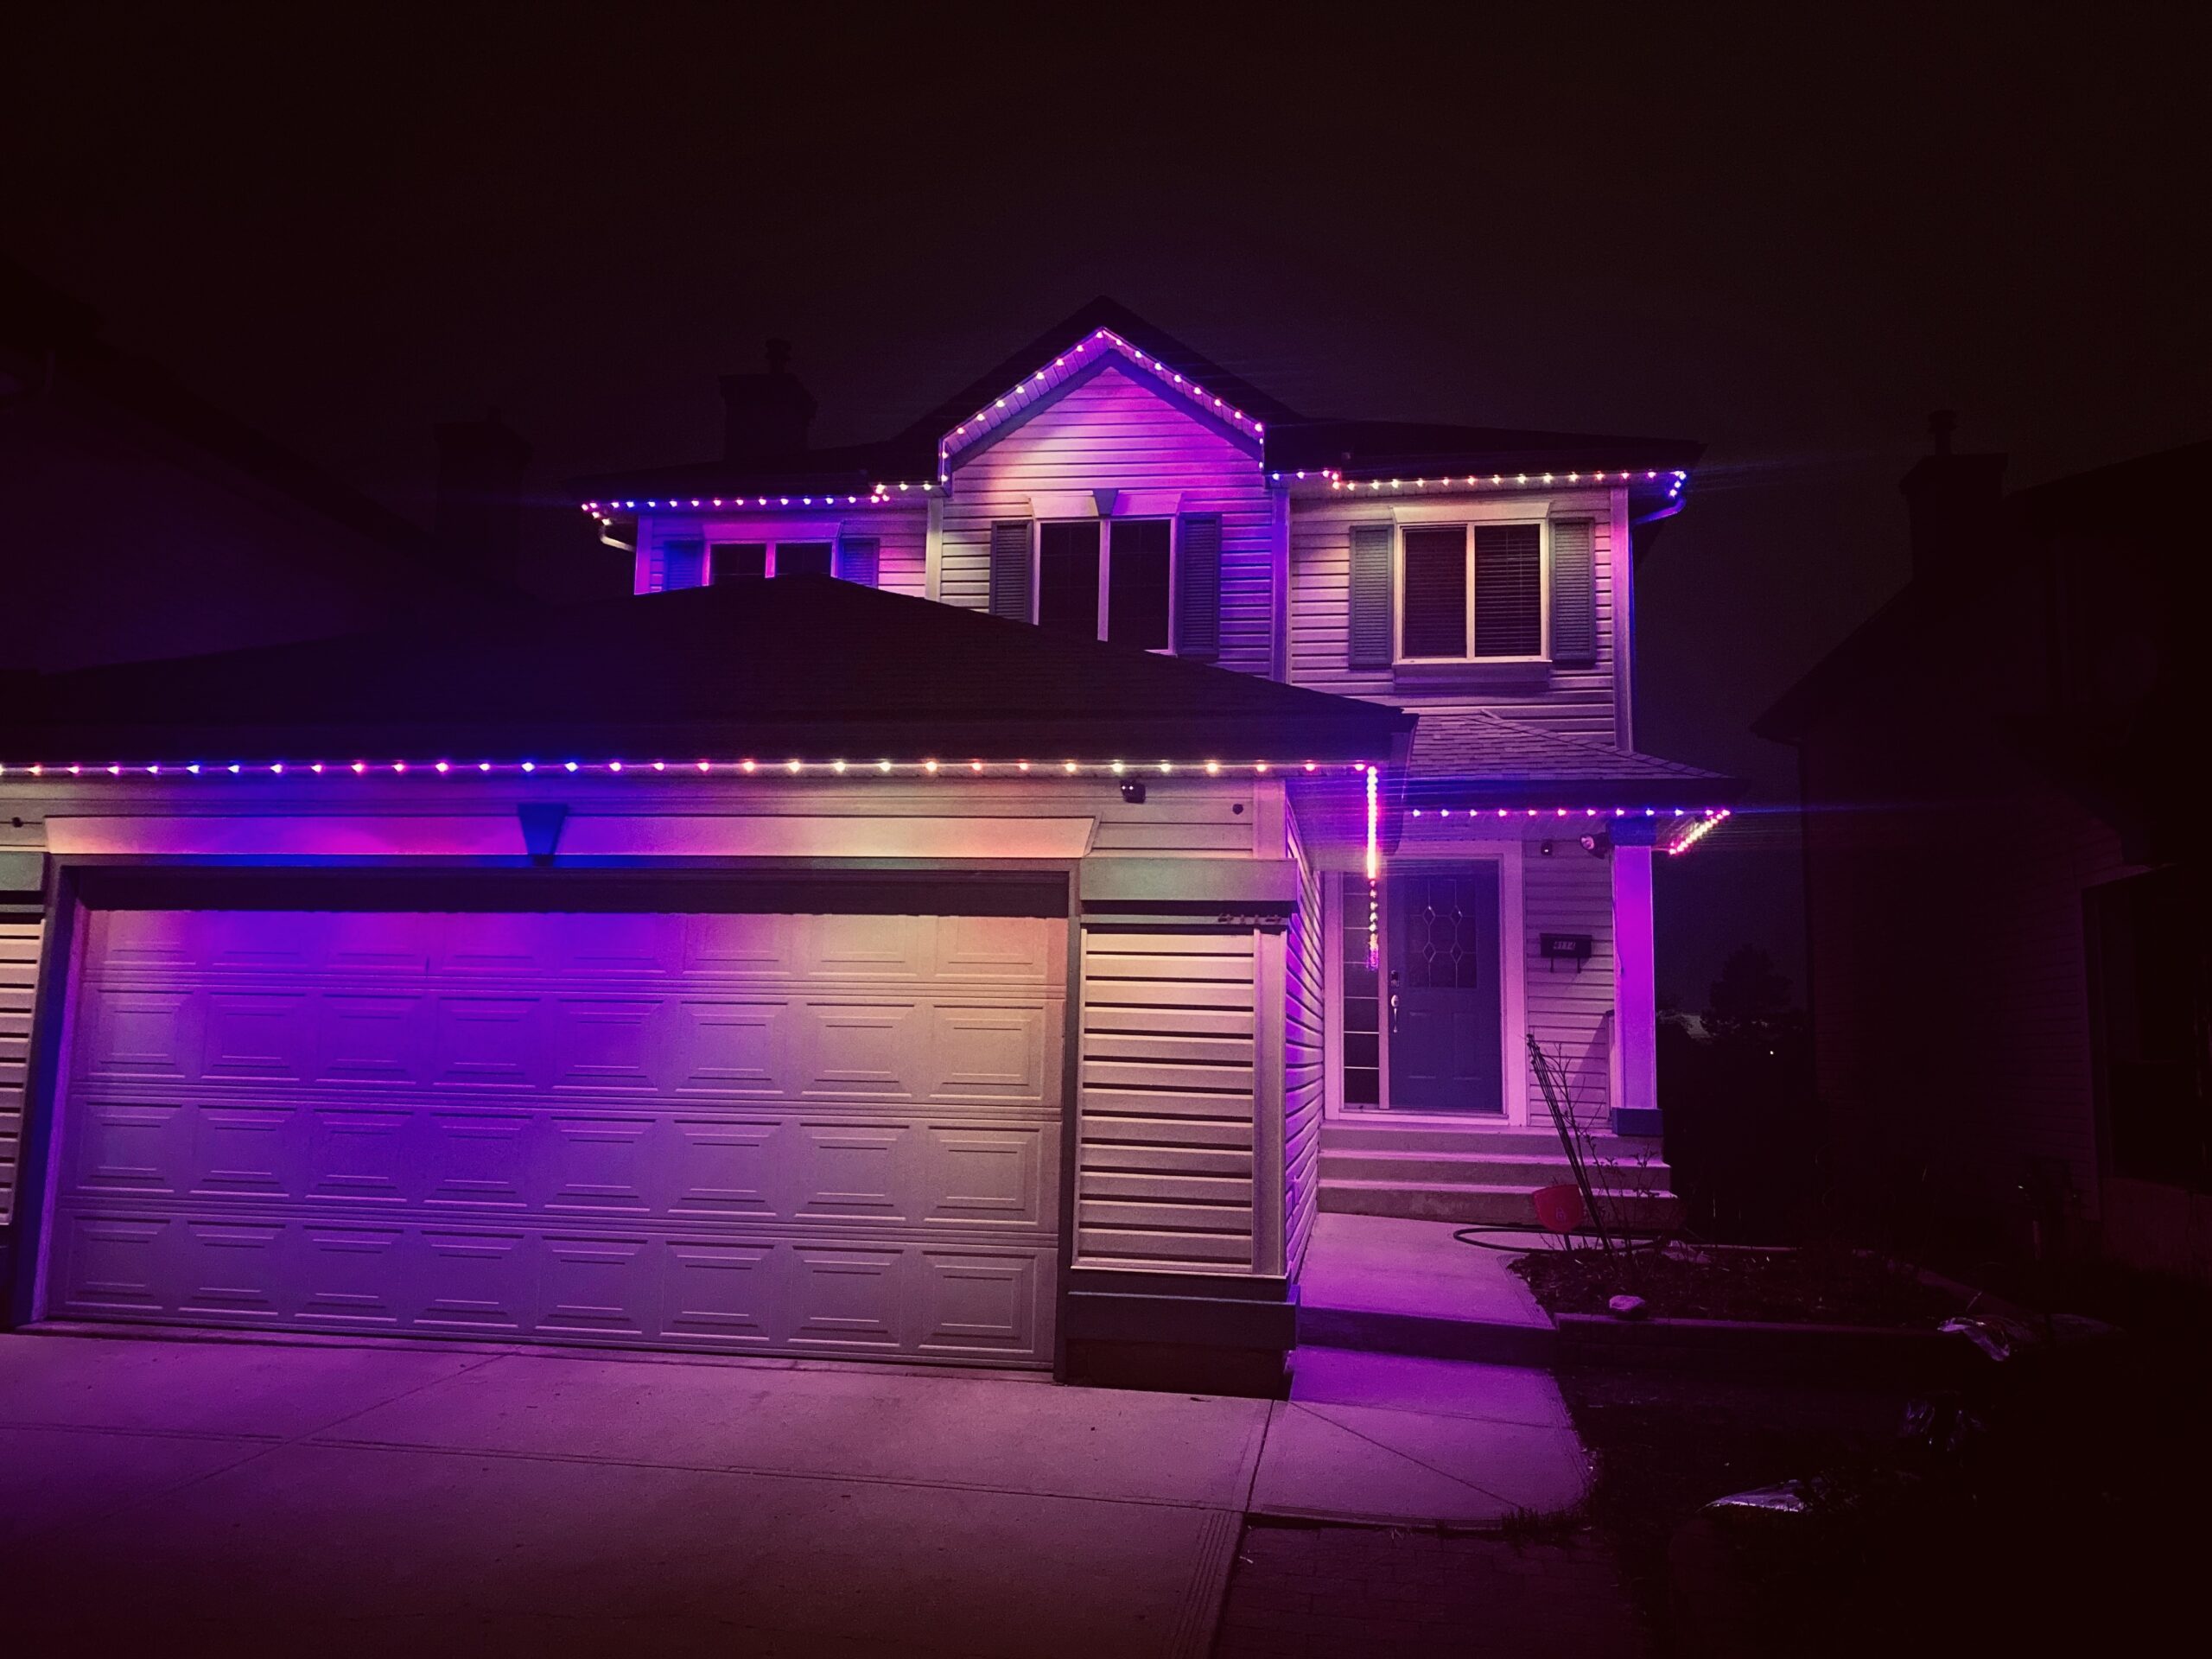 LED lights - magical touch to house